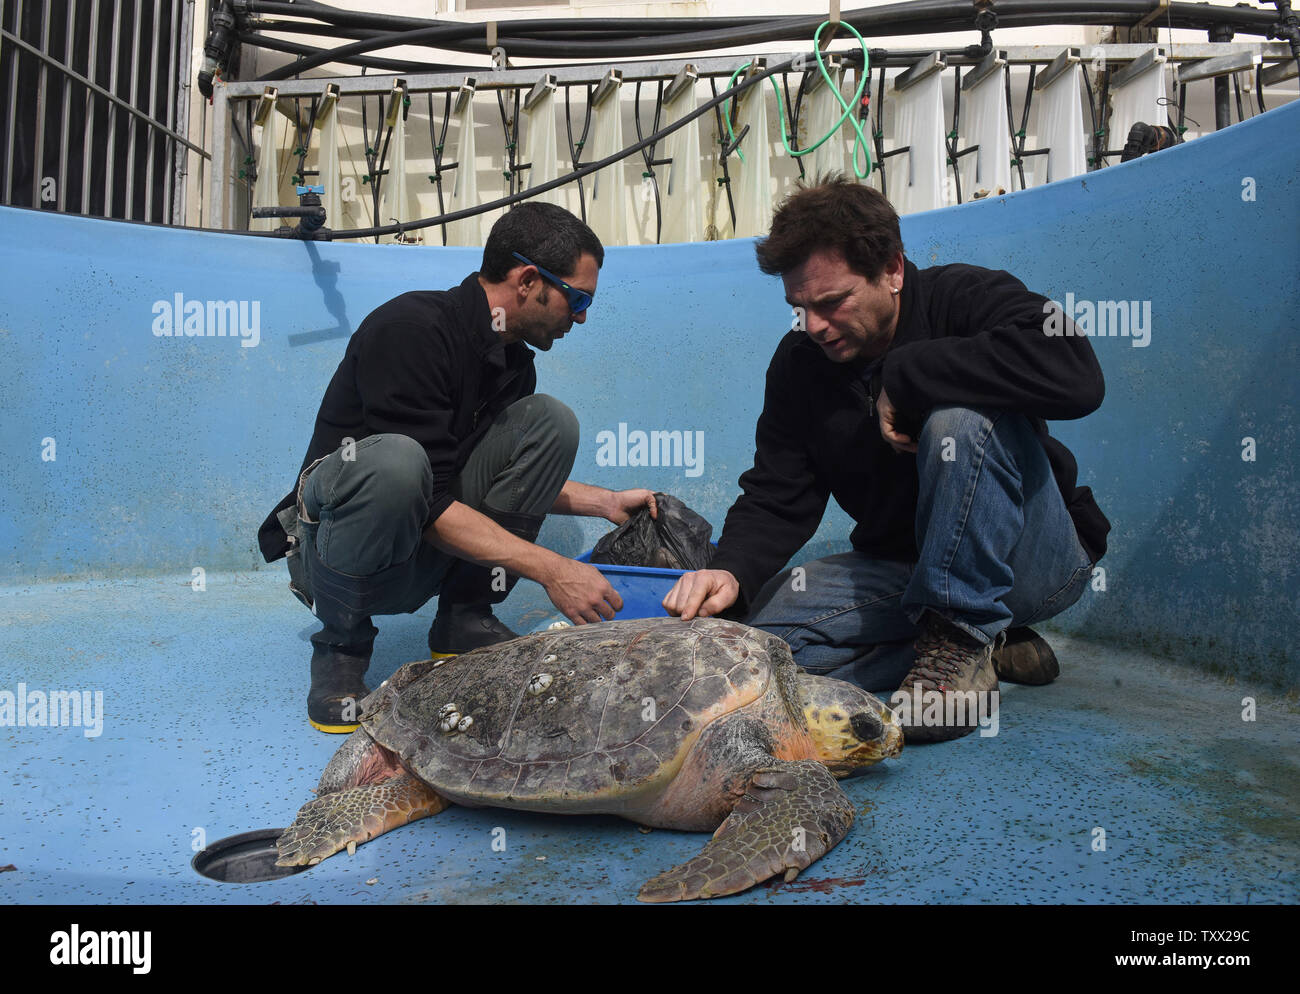 Dr. Yaniv Levy, (R),  Director of the Israel Sea Turtle Rescue Center of the Israeli National and Parks Authority, prepares to attach satellite tracking device to a recovered loggerhead sea turtle in Mikhmoret, Israel, January 20, 2019. The ten year old center is  located on the Mediterranean Sea and saves sea turtles that have washed ashore on the Israel coast. Recently more than forty sea turtles waved ashore suffering from shock wave trauma. The injured sea turtles are given medical care and a safe place to heal, before being released back to the sea. The center is also breeding Green sea t Stock Photo